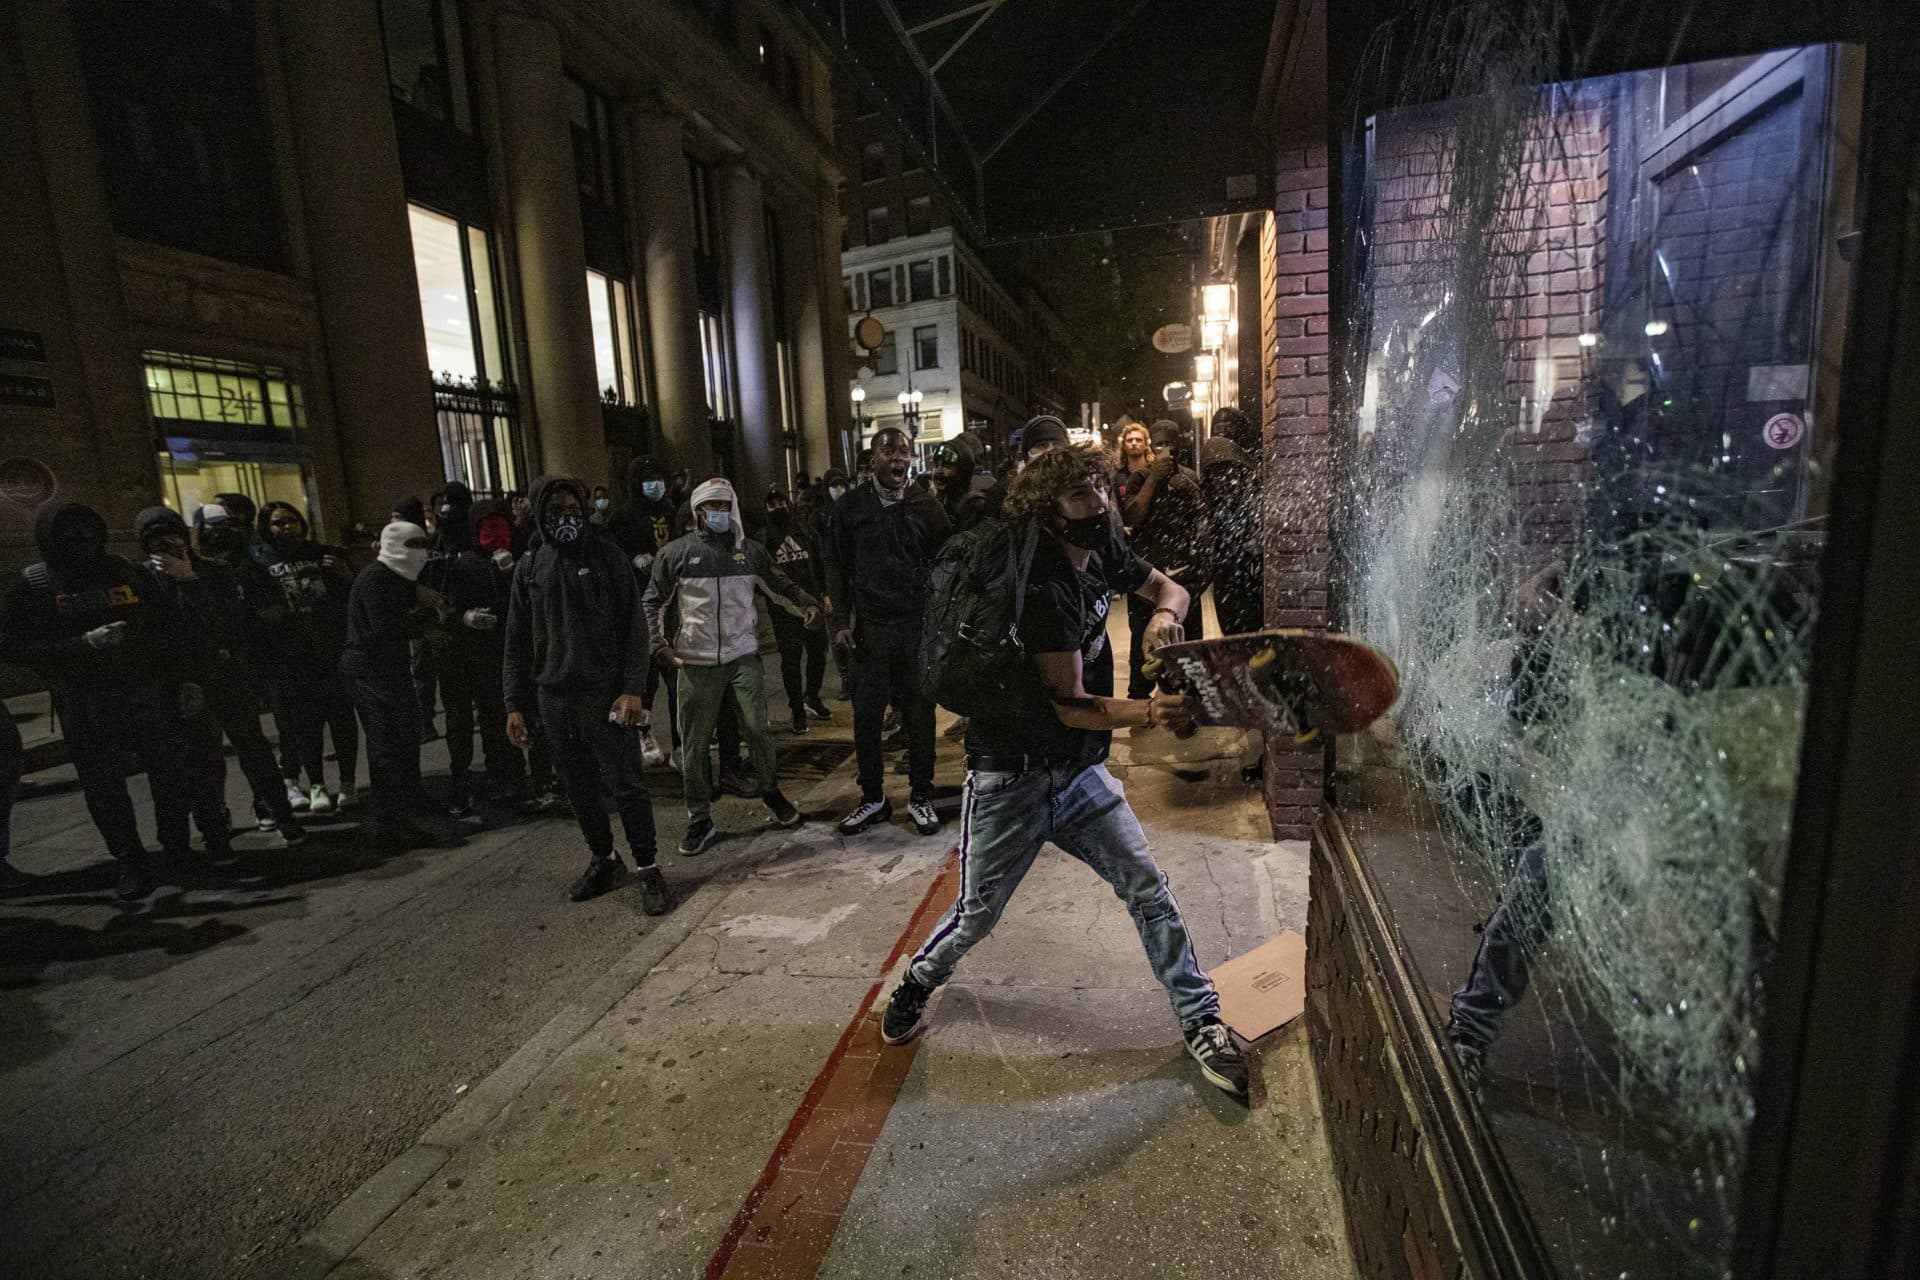 At night, a largely peaceful day of protest in downtown Boston on May 31, 2020, gave way to clashes between police and protesters, and some people broke into stores in Downtown Crossing. (Jesse Costa/WBUR)